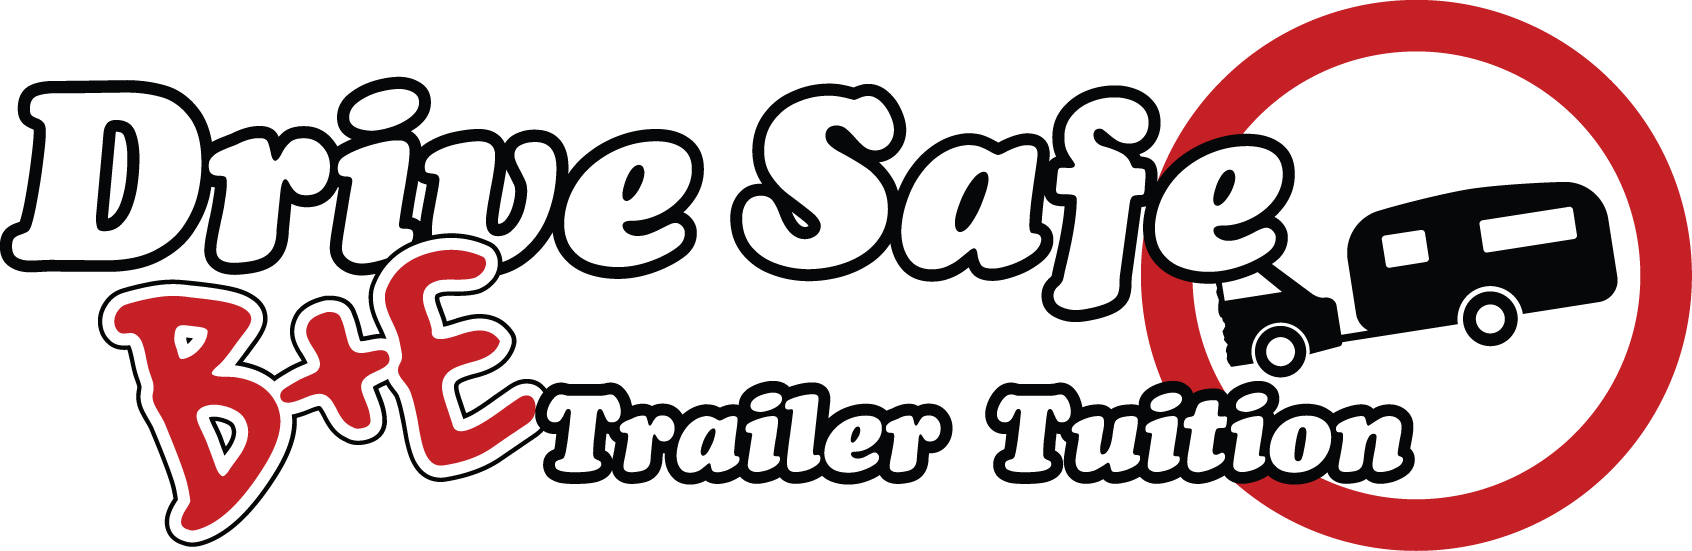 Drive Safe Driving School B E Trailer Towing Tuition - Drive Safe Driving School B E Trailer Towing Tuition (1692x551)